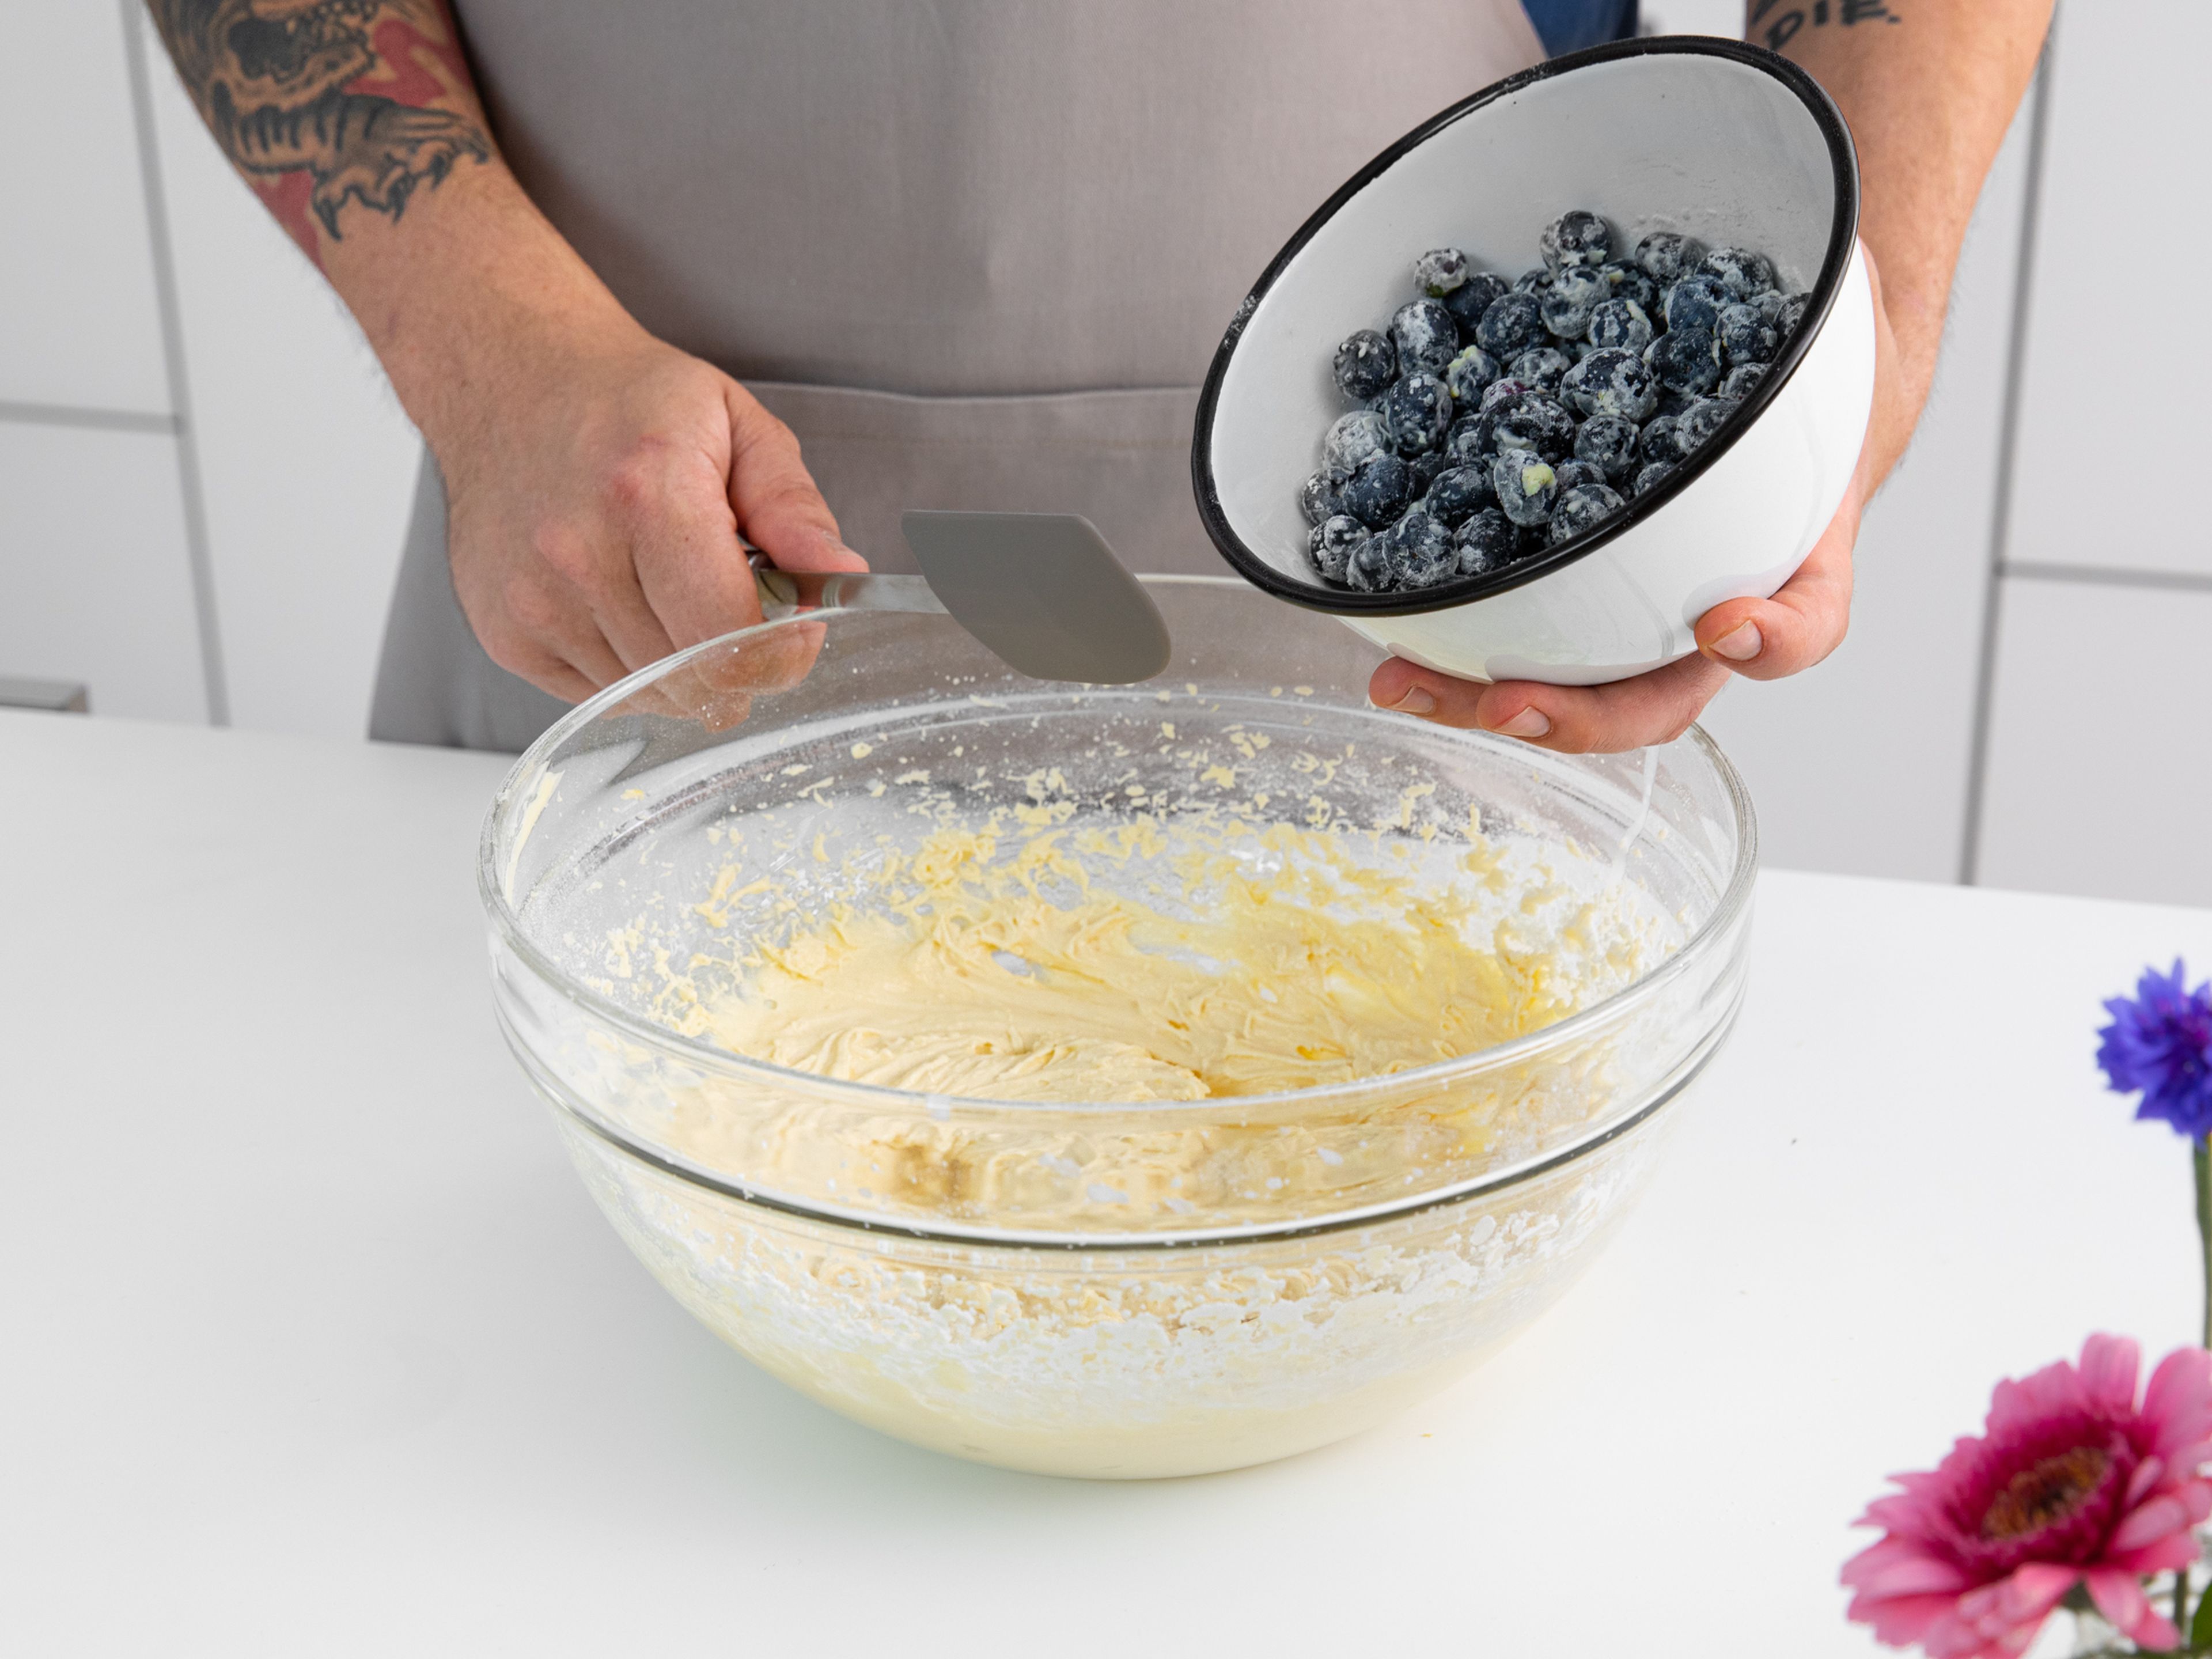 Add half the flour mixture to the butter-sugar mixture. Mix until just combined. While mixing, slowly stream in buttermilk. Add remaining flour and mix, then fold in the blueberries with a rubber spatula.